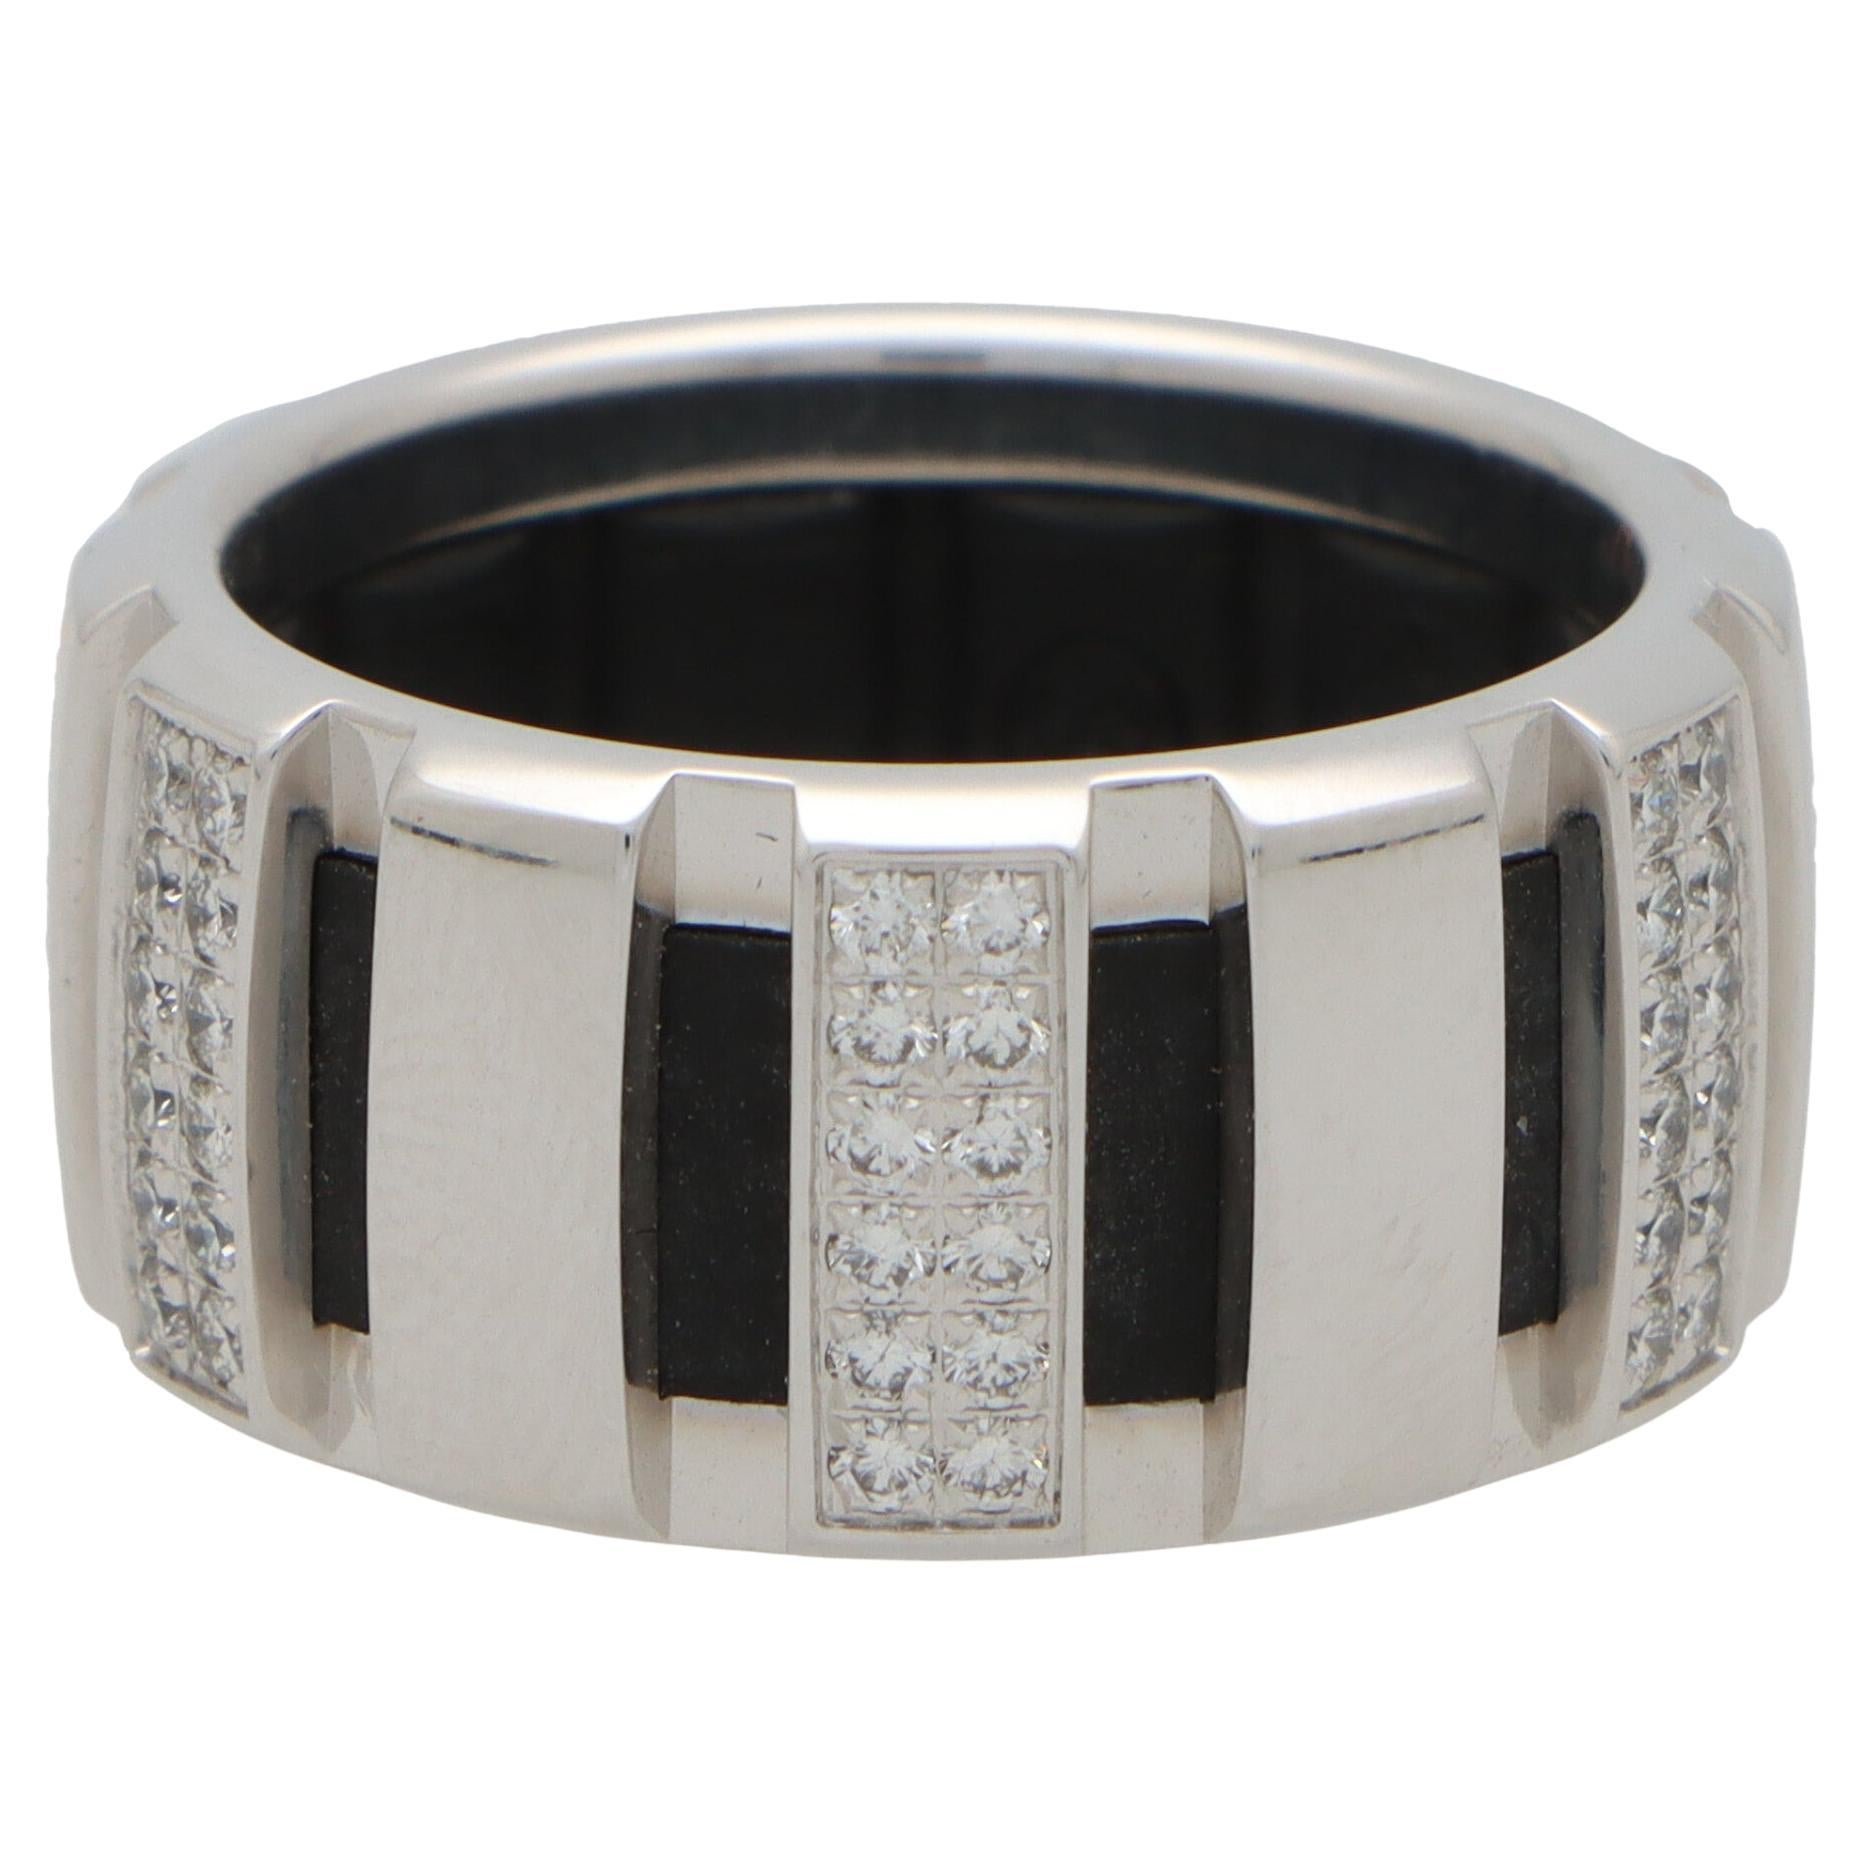 Vintage Chaumet 'Class One' Rubber and Diamond Band Ring in 18k White Gold